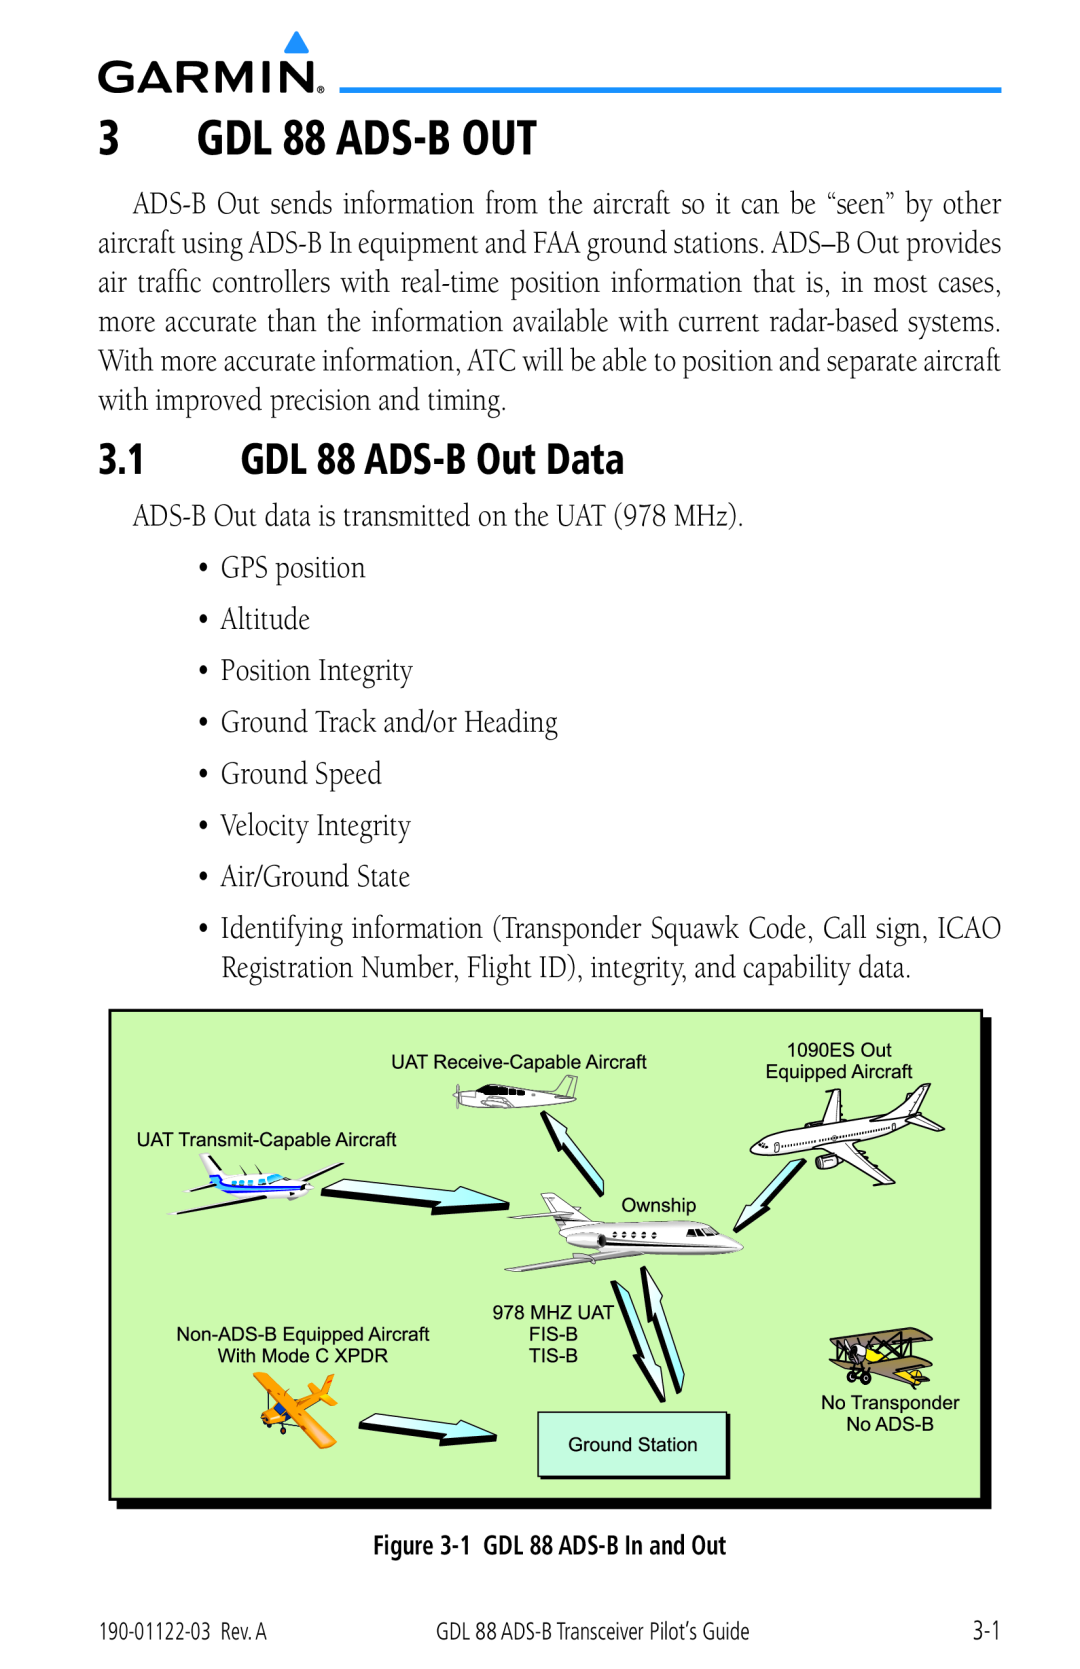 Garmin manual GDL 88 ADS-B OUT, GDL 88 ADS-B Out Data, 1 GDL 88 ADS-B In and Out 